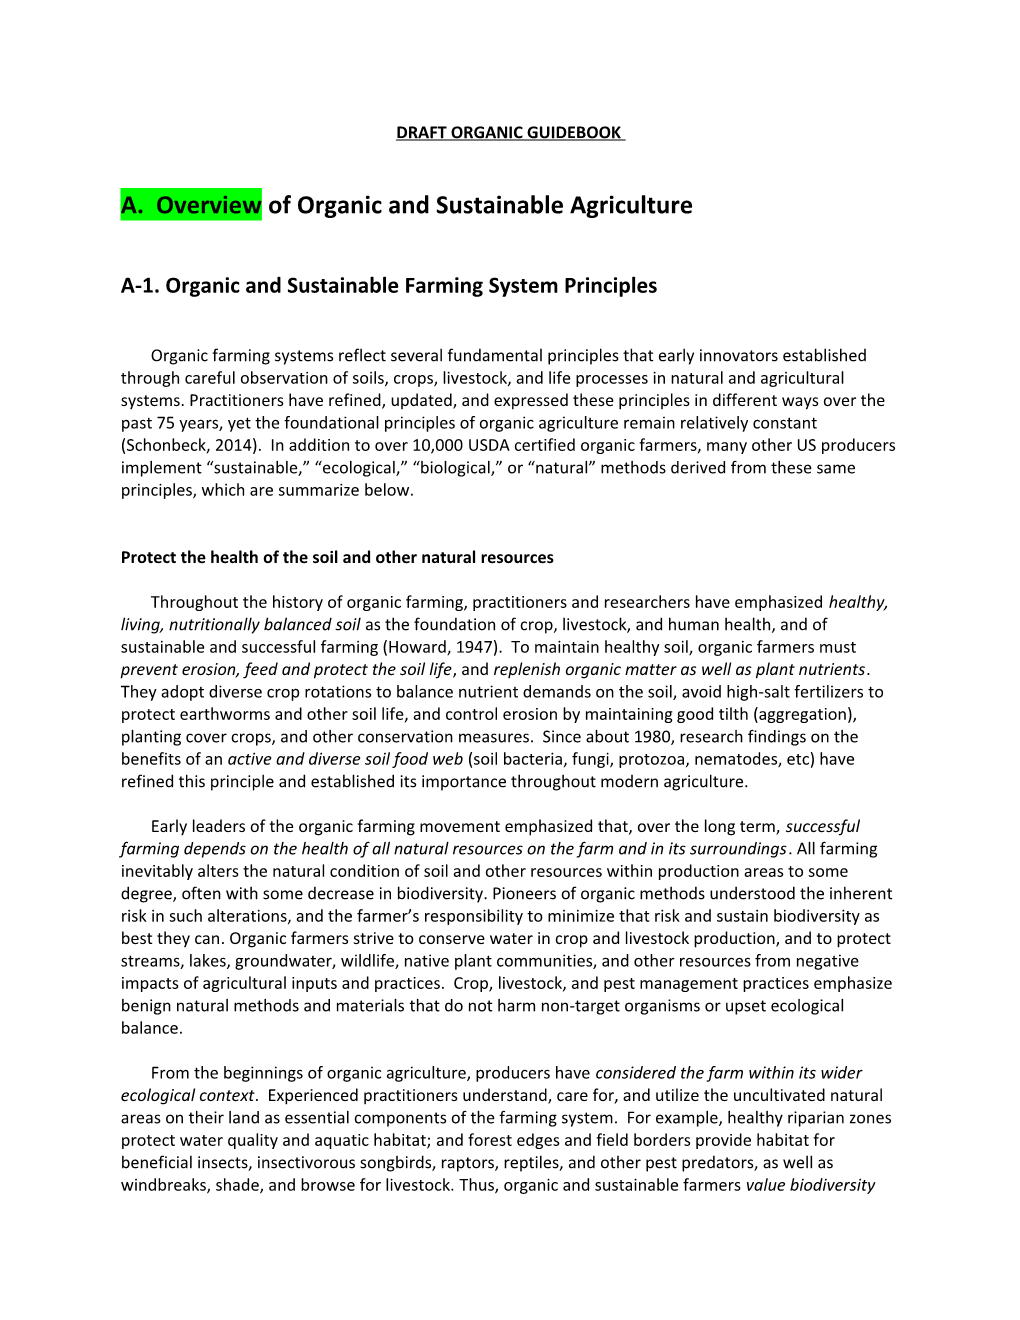 A. Overview of Organic and Sustainable Agriculture